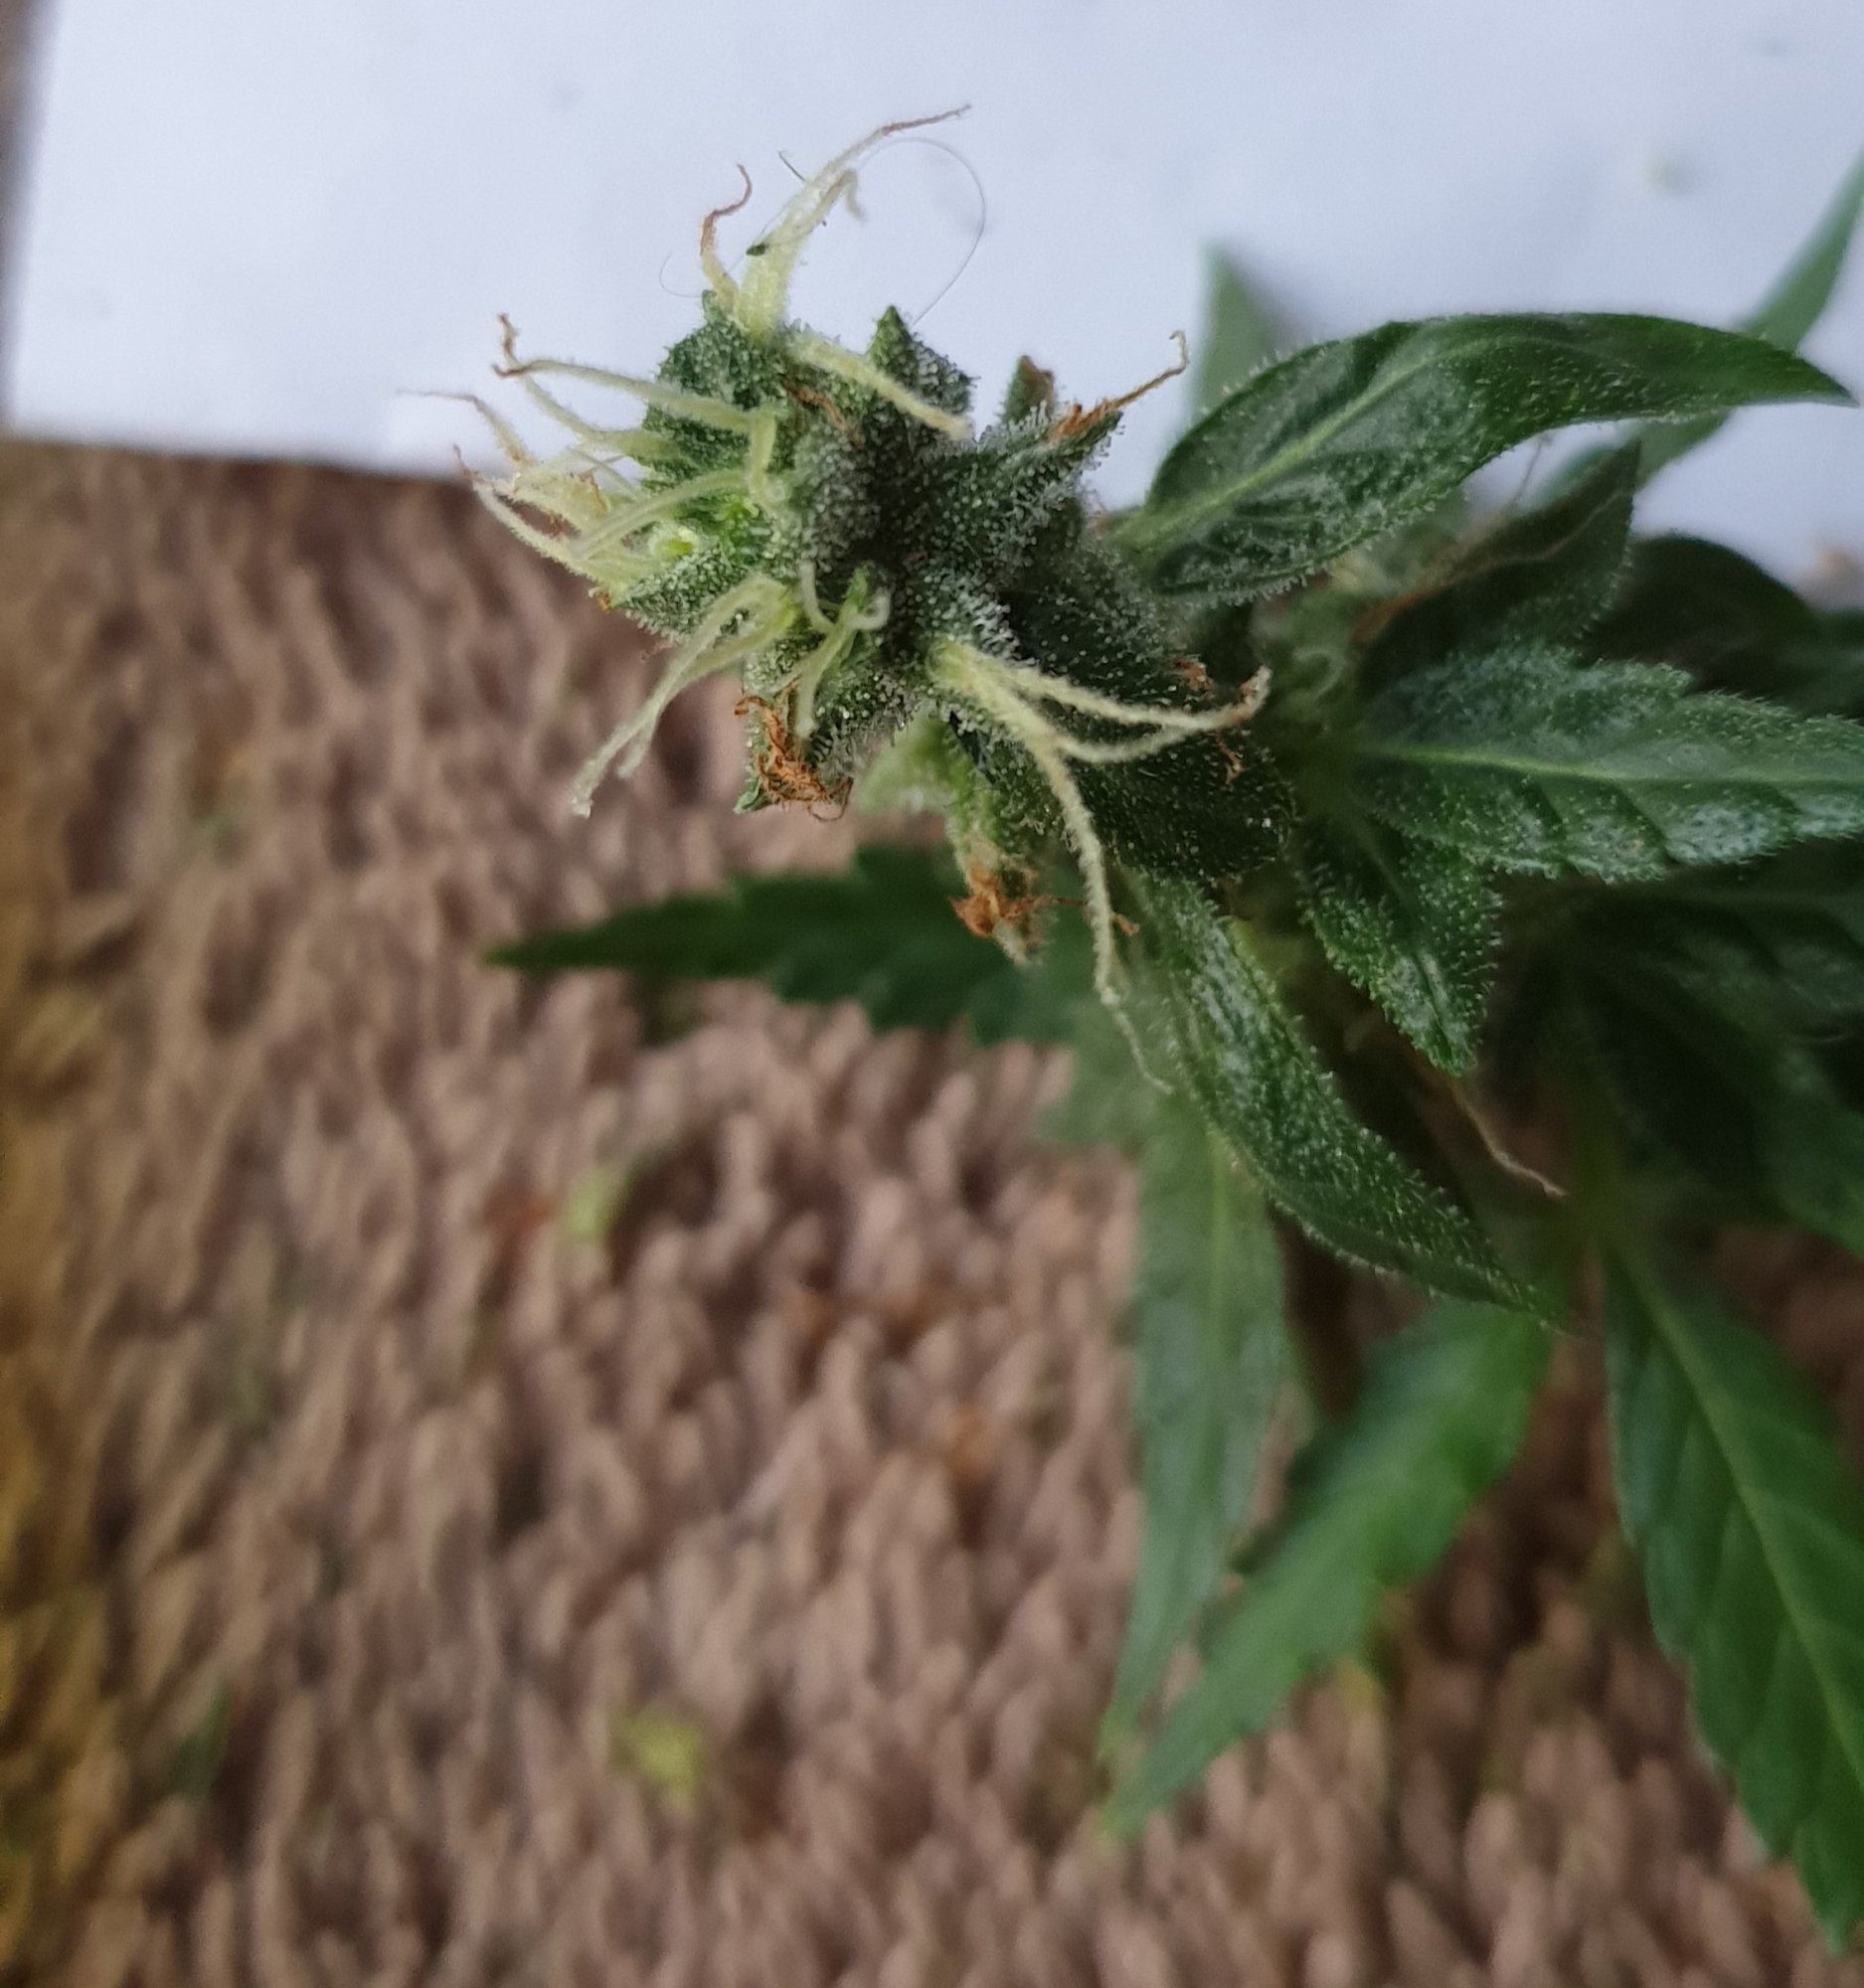 Could someone have a look at my buds